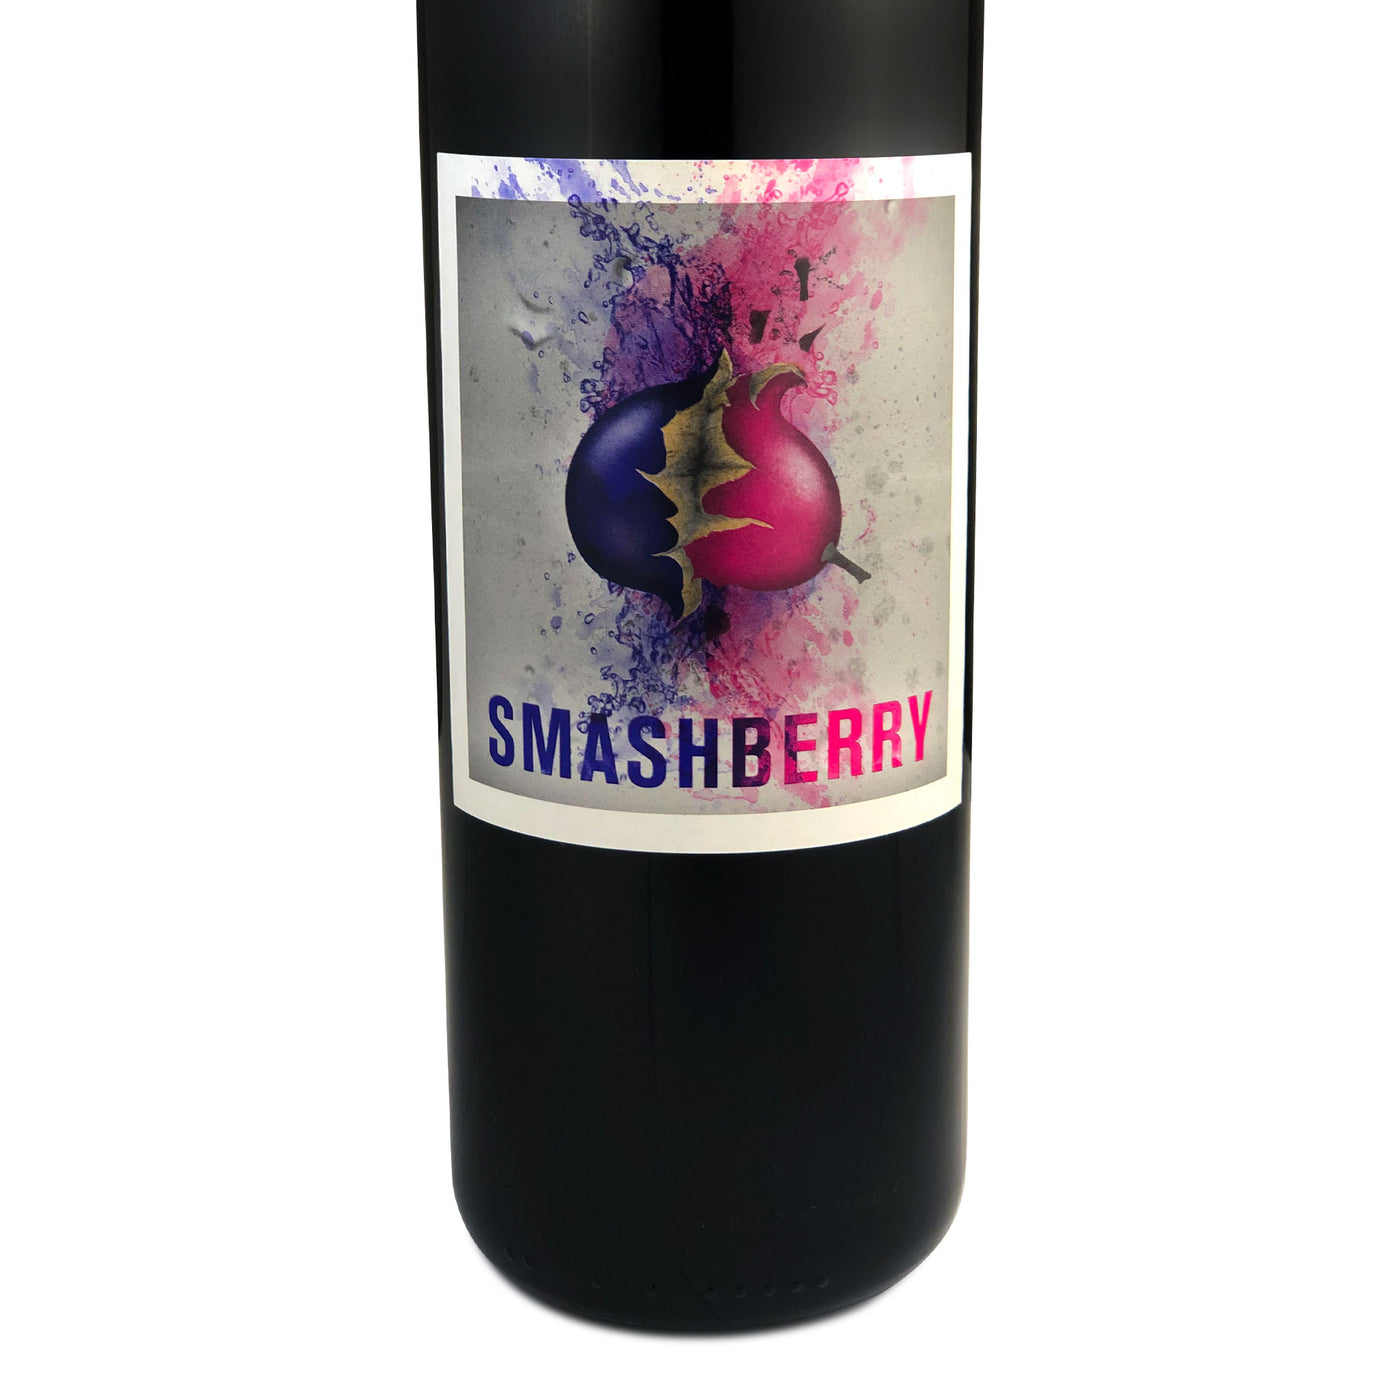 Smashberry Red Blend 2013